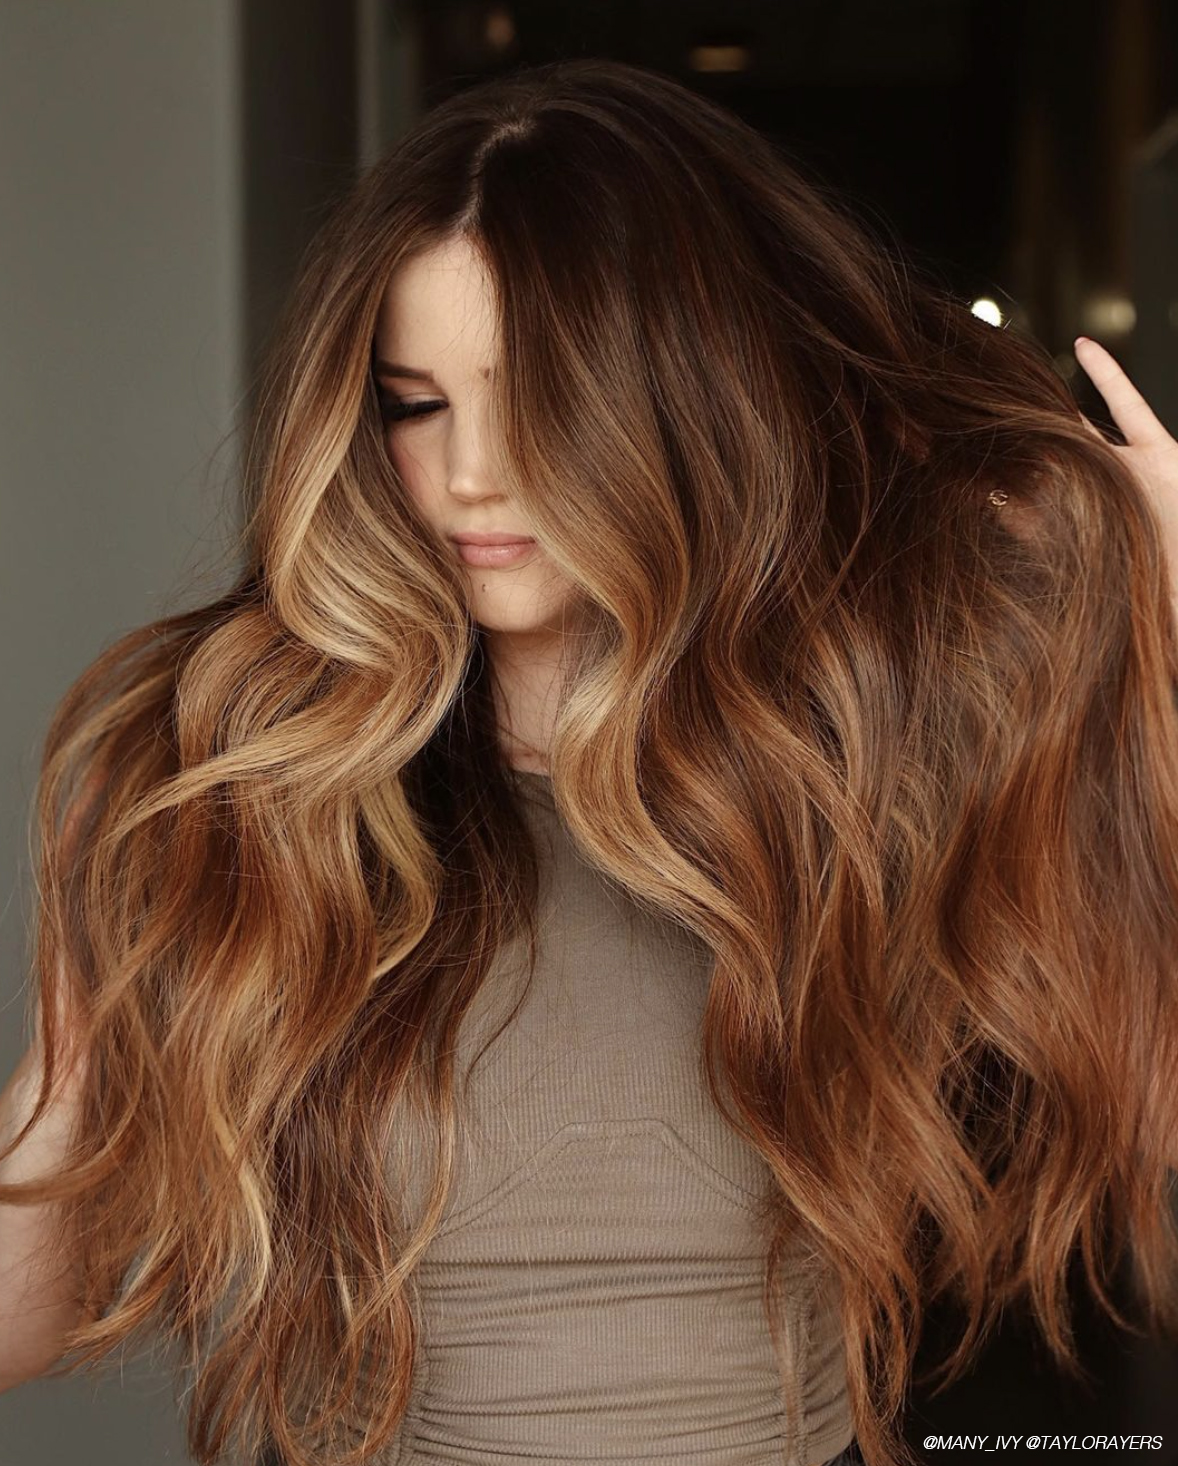 Hair Color Trends - Beauty Photos, Trends & News | Allure